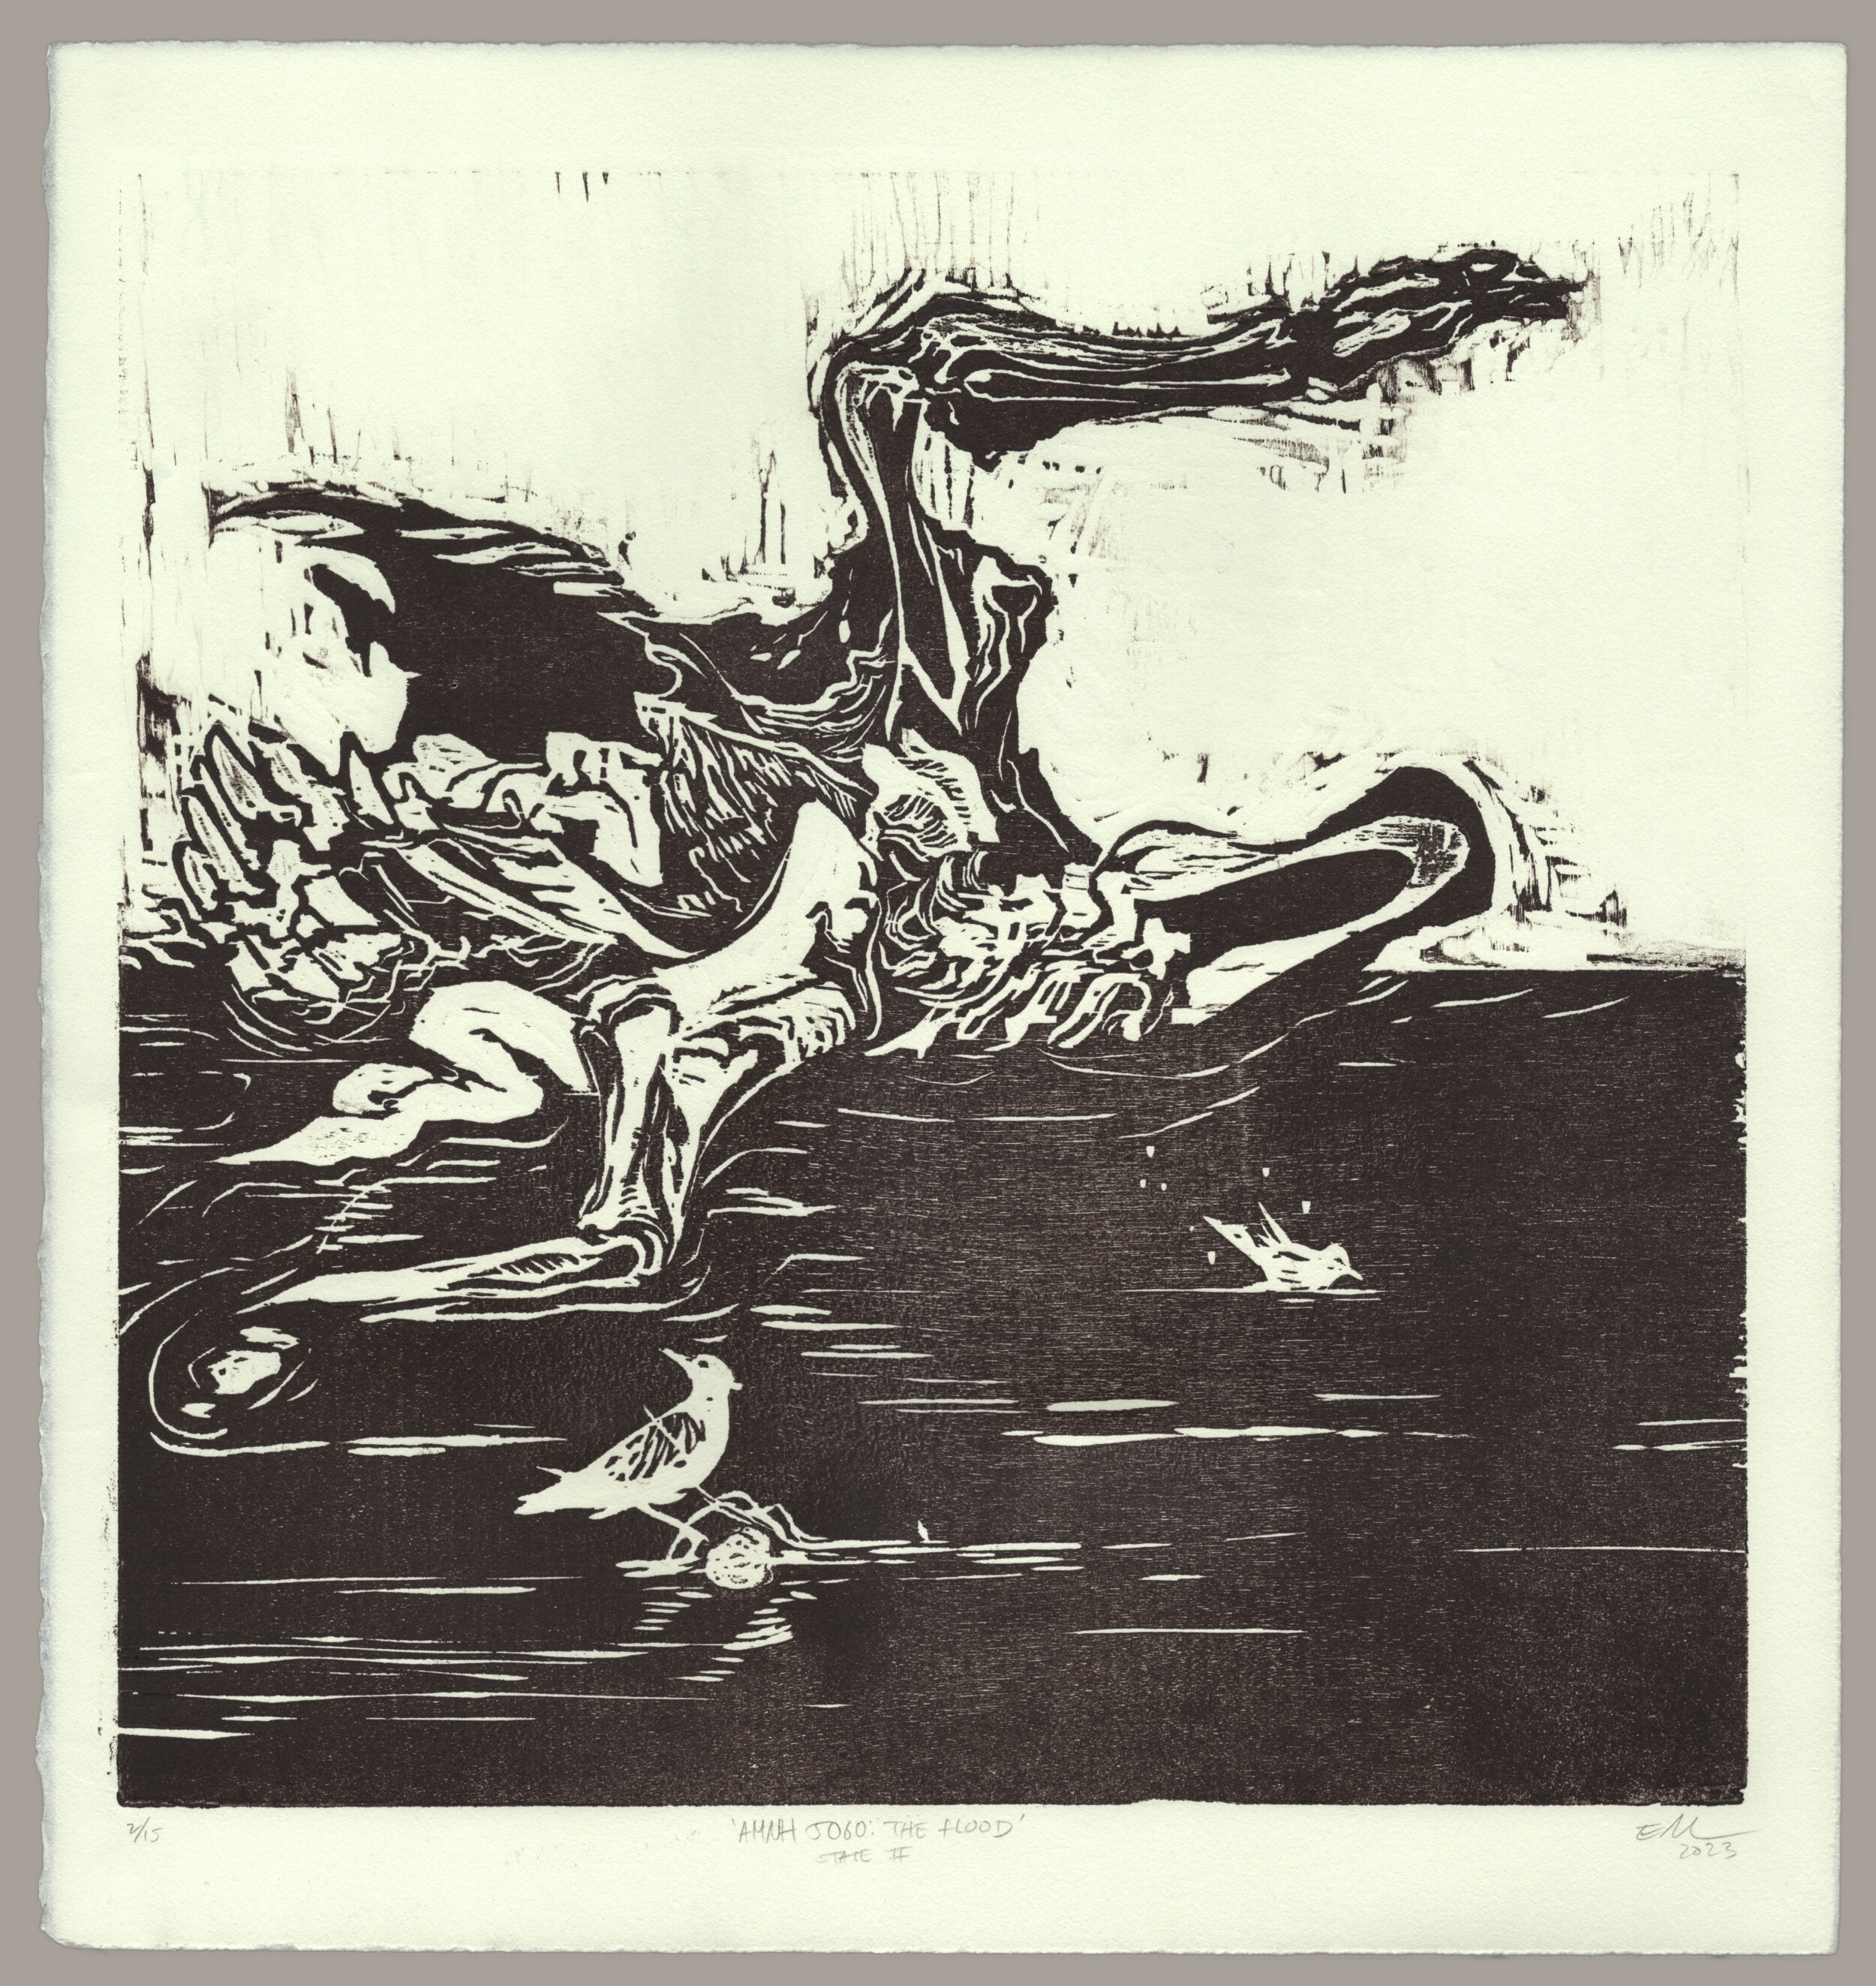 A black and white print of a duckbill dinosaur carcass lying on a floodplain with a shallow covering of water. One of its front legs sticks up into the air and its head is upturned so that its bill-shaped skull is visible. Its chest is torn open and entrails fall out into the water. Beneath the large dinosaur, a small bird washes itself and another perches on a piece of driftwood. The print is signed: '2 of 15, AMNH 5060 (The Flood) State 2, EM 2023'